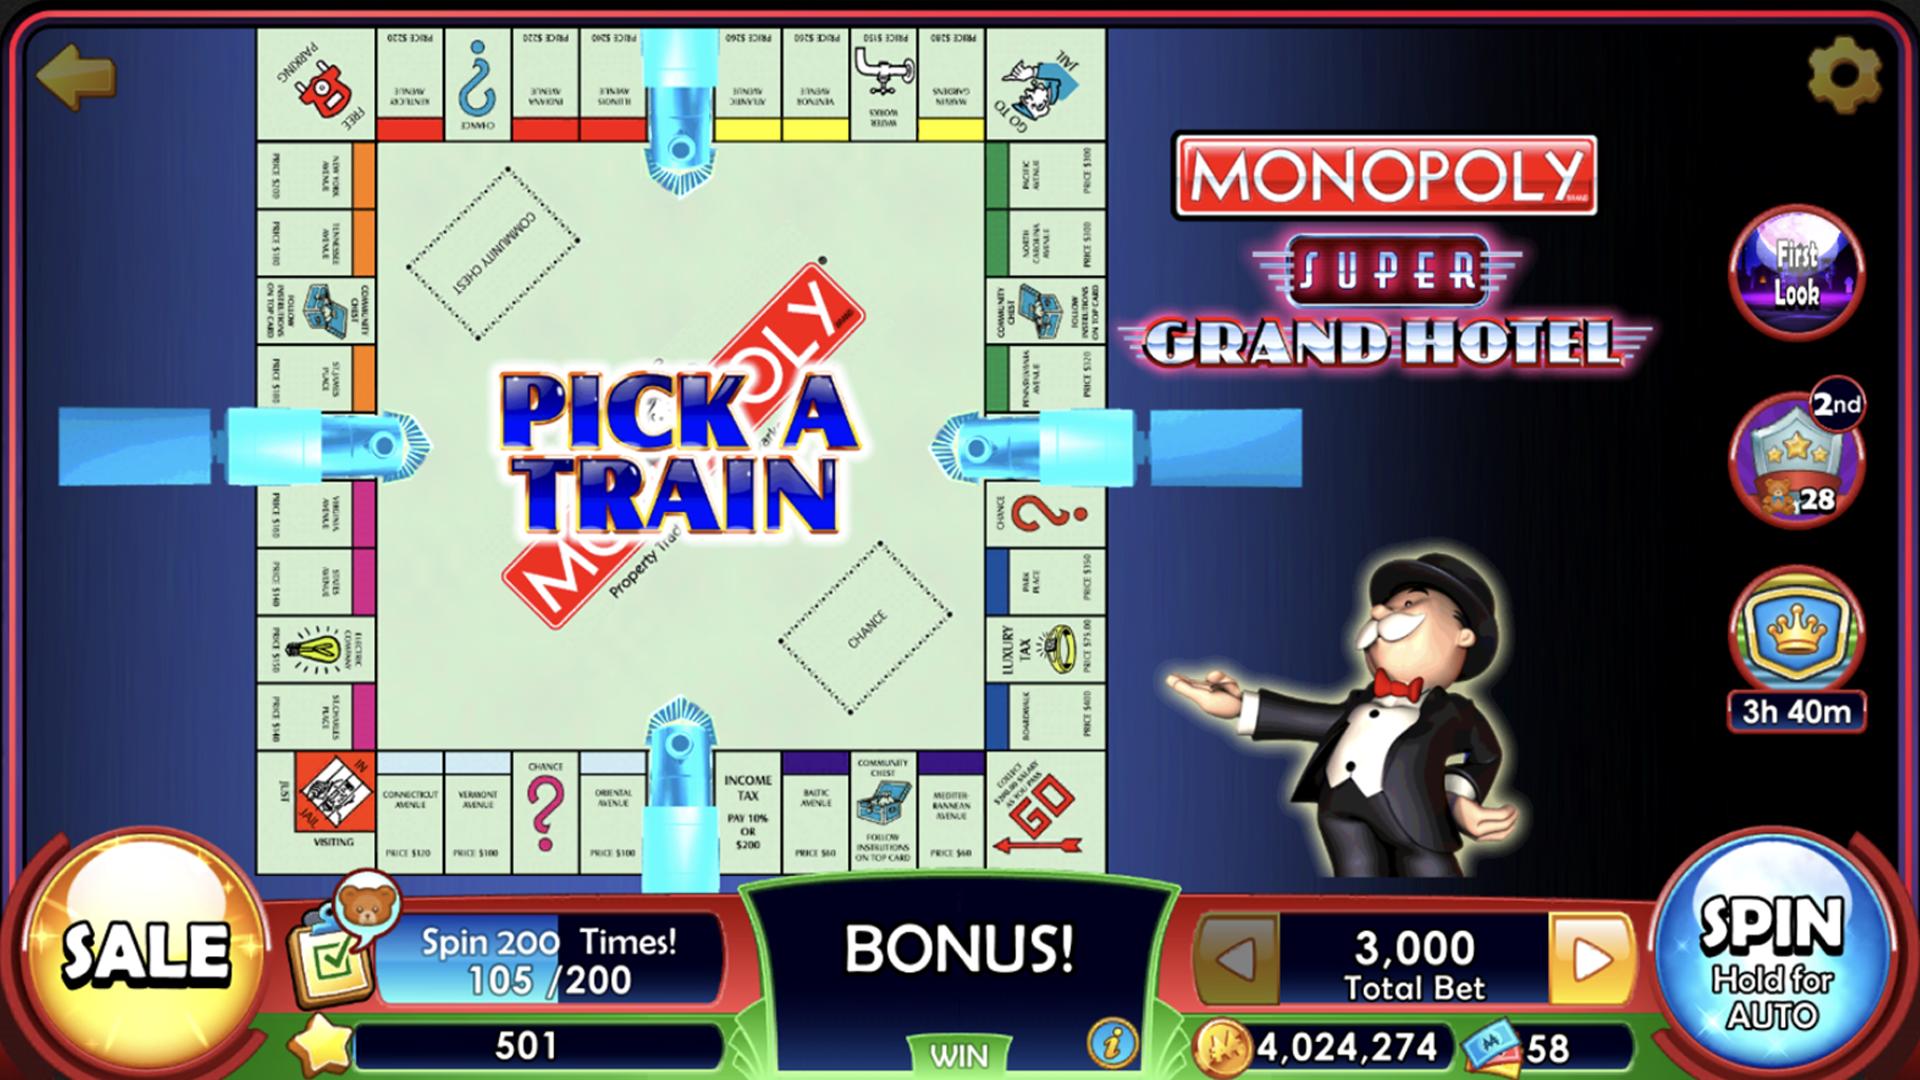 monopoly slots free coins 2022